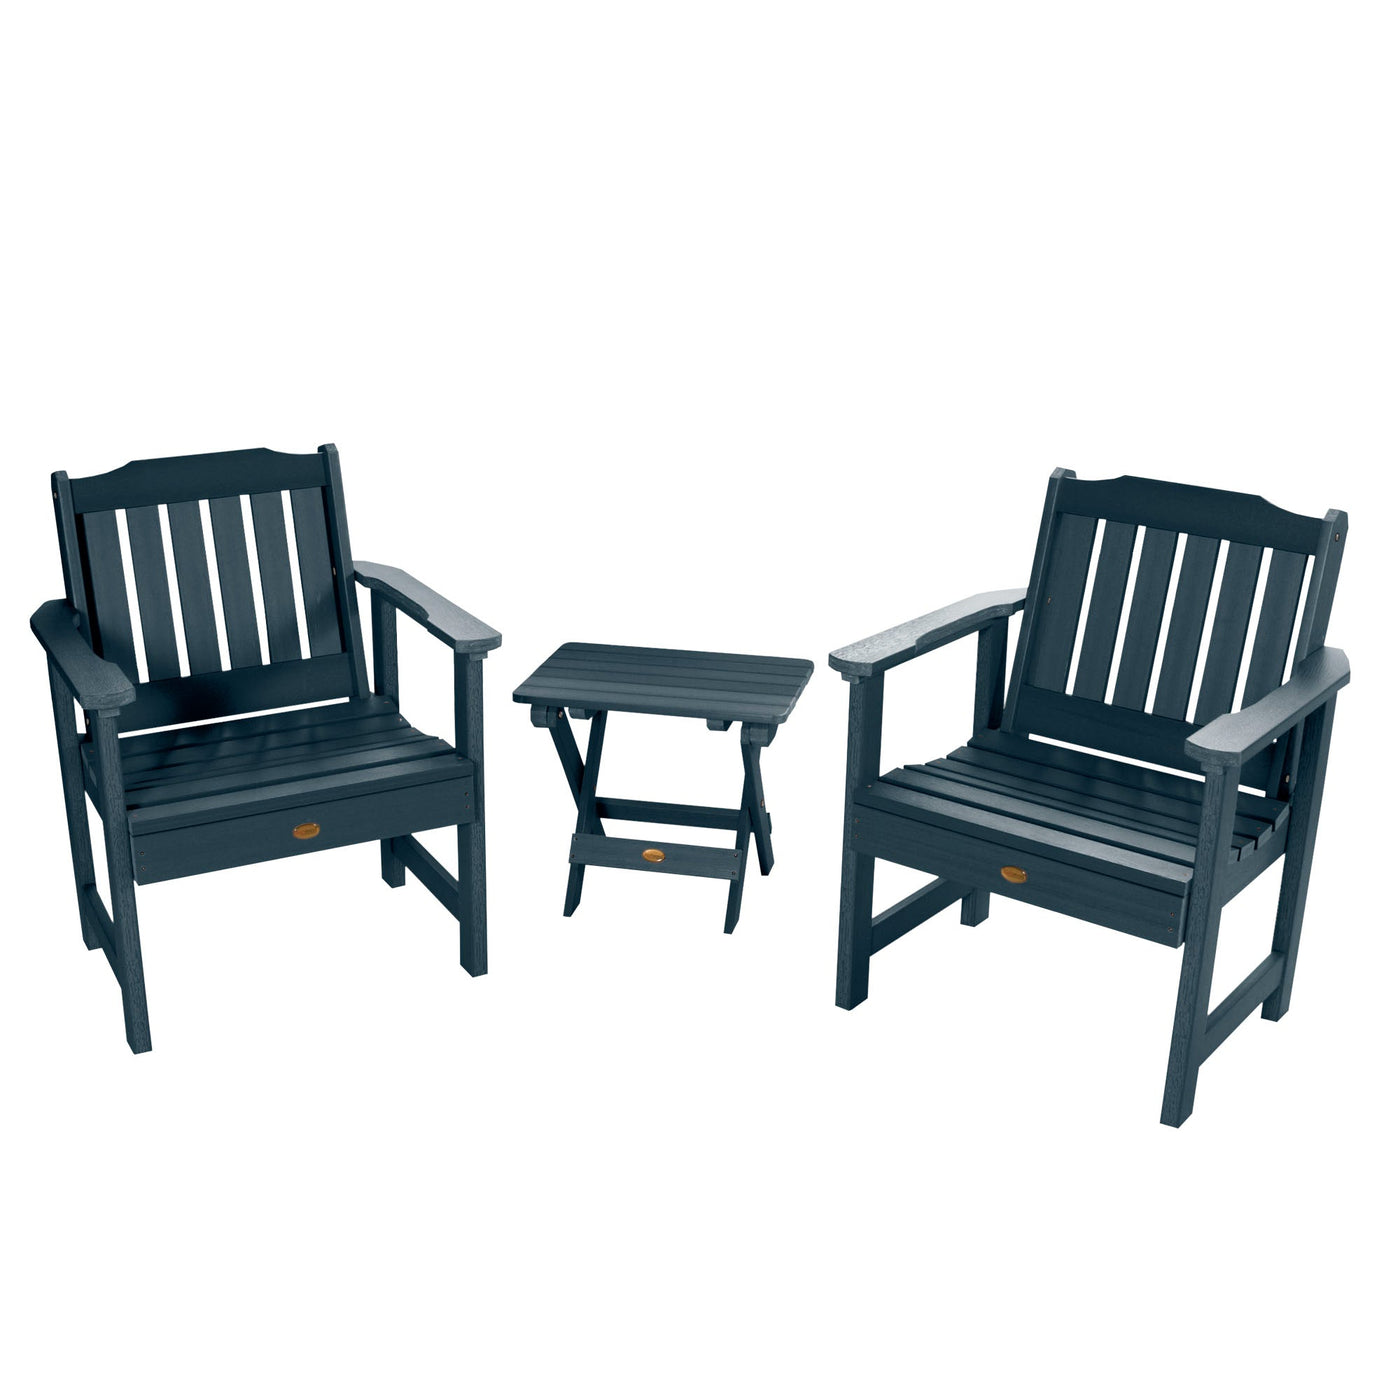 2 Lehigh Garden Chairs with Folding Adirondack Side Table Kitted Sets Highwood USA Federal Blue 